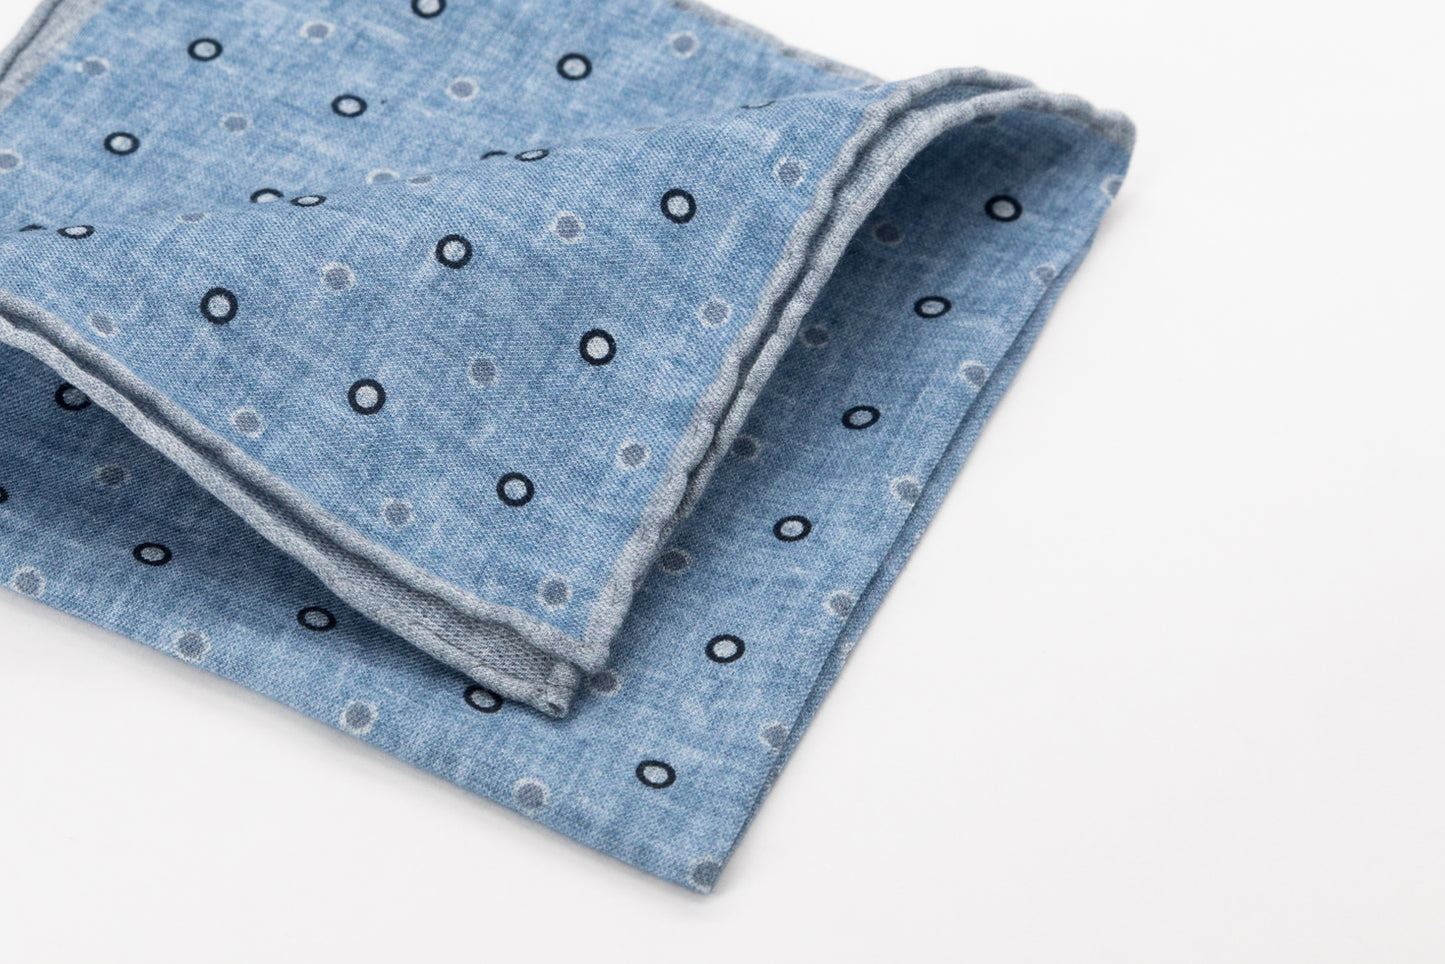 Pocket Square - Blue and Grey Rounds on Sky Blue Background